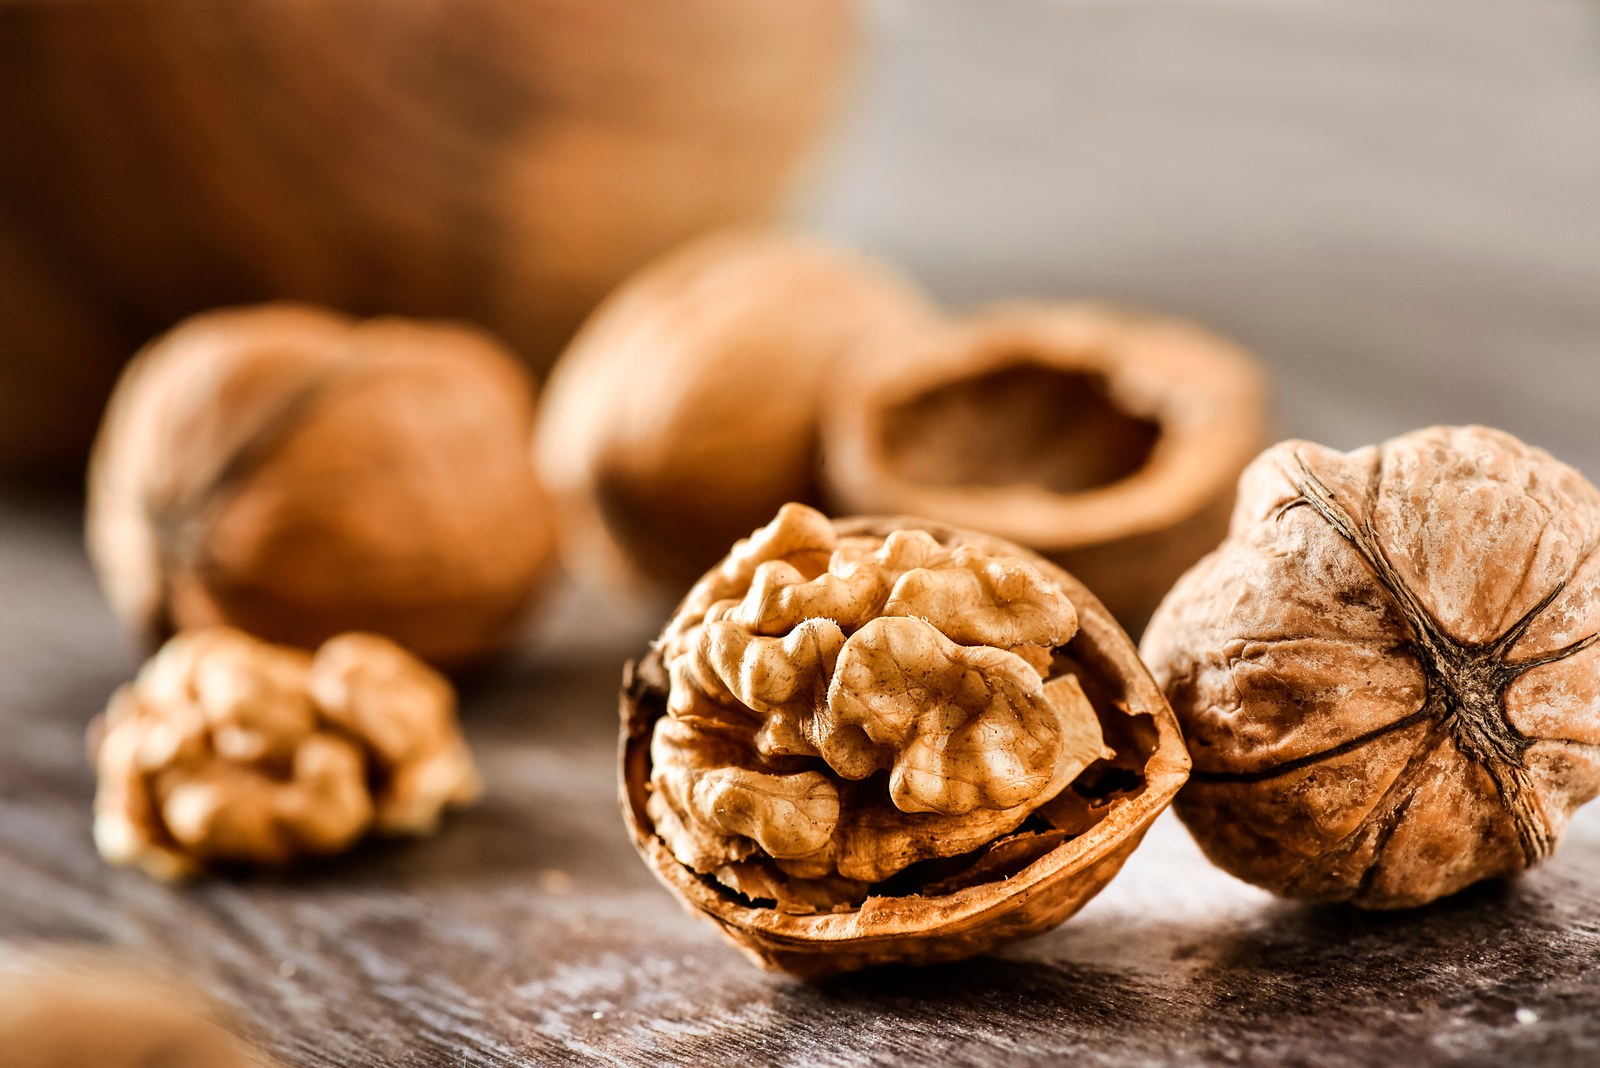 💖 If You Like Eating 27/35 of These Aphrodisiacs, You’re a 🥰 Real Romantic Walnuts